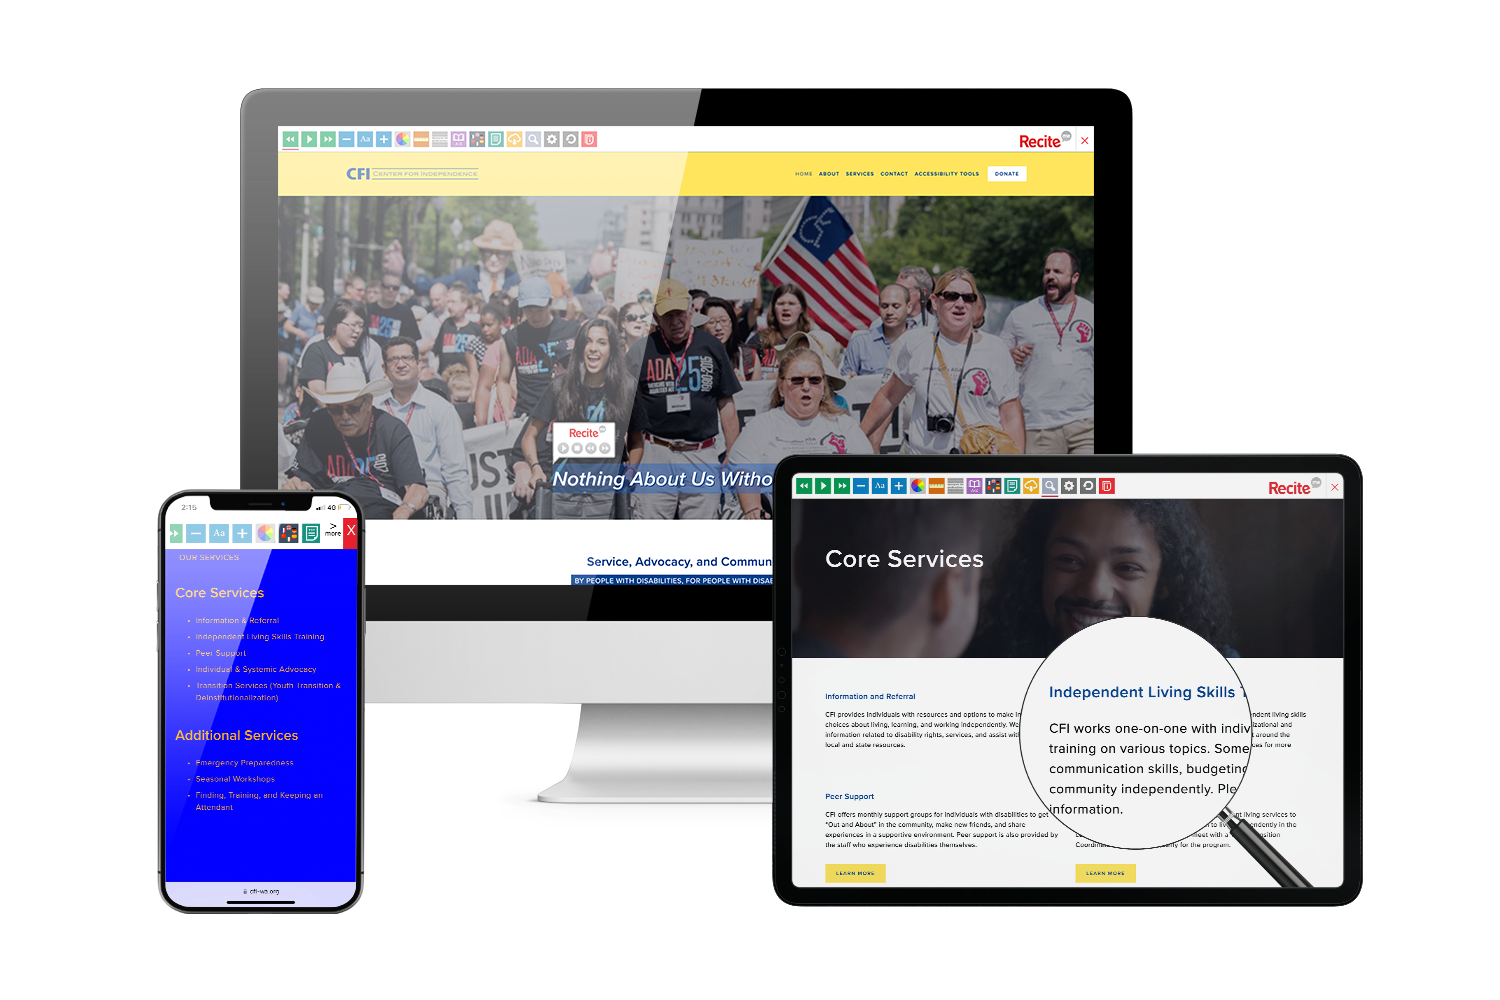 Desktop, mobile and tablet with Center for Independence website using the Recite Me assistive toolbar